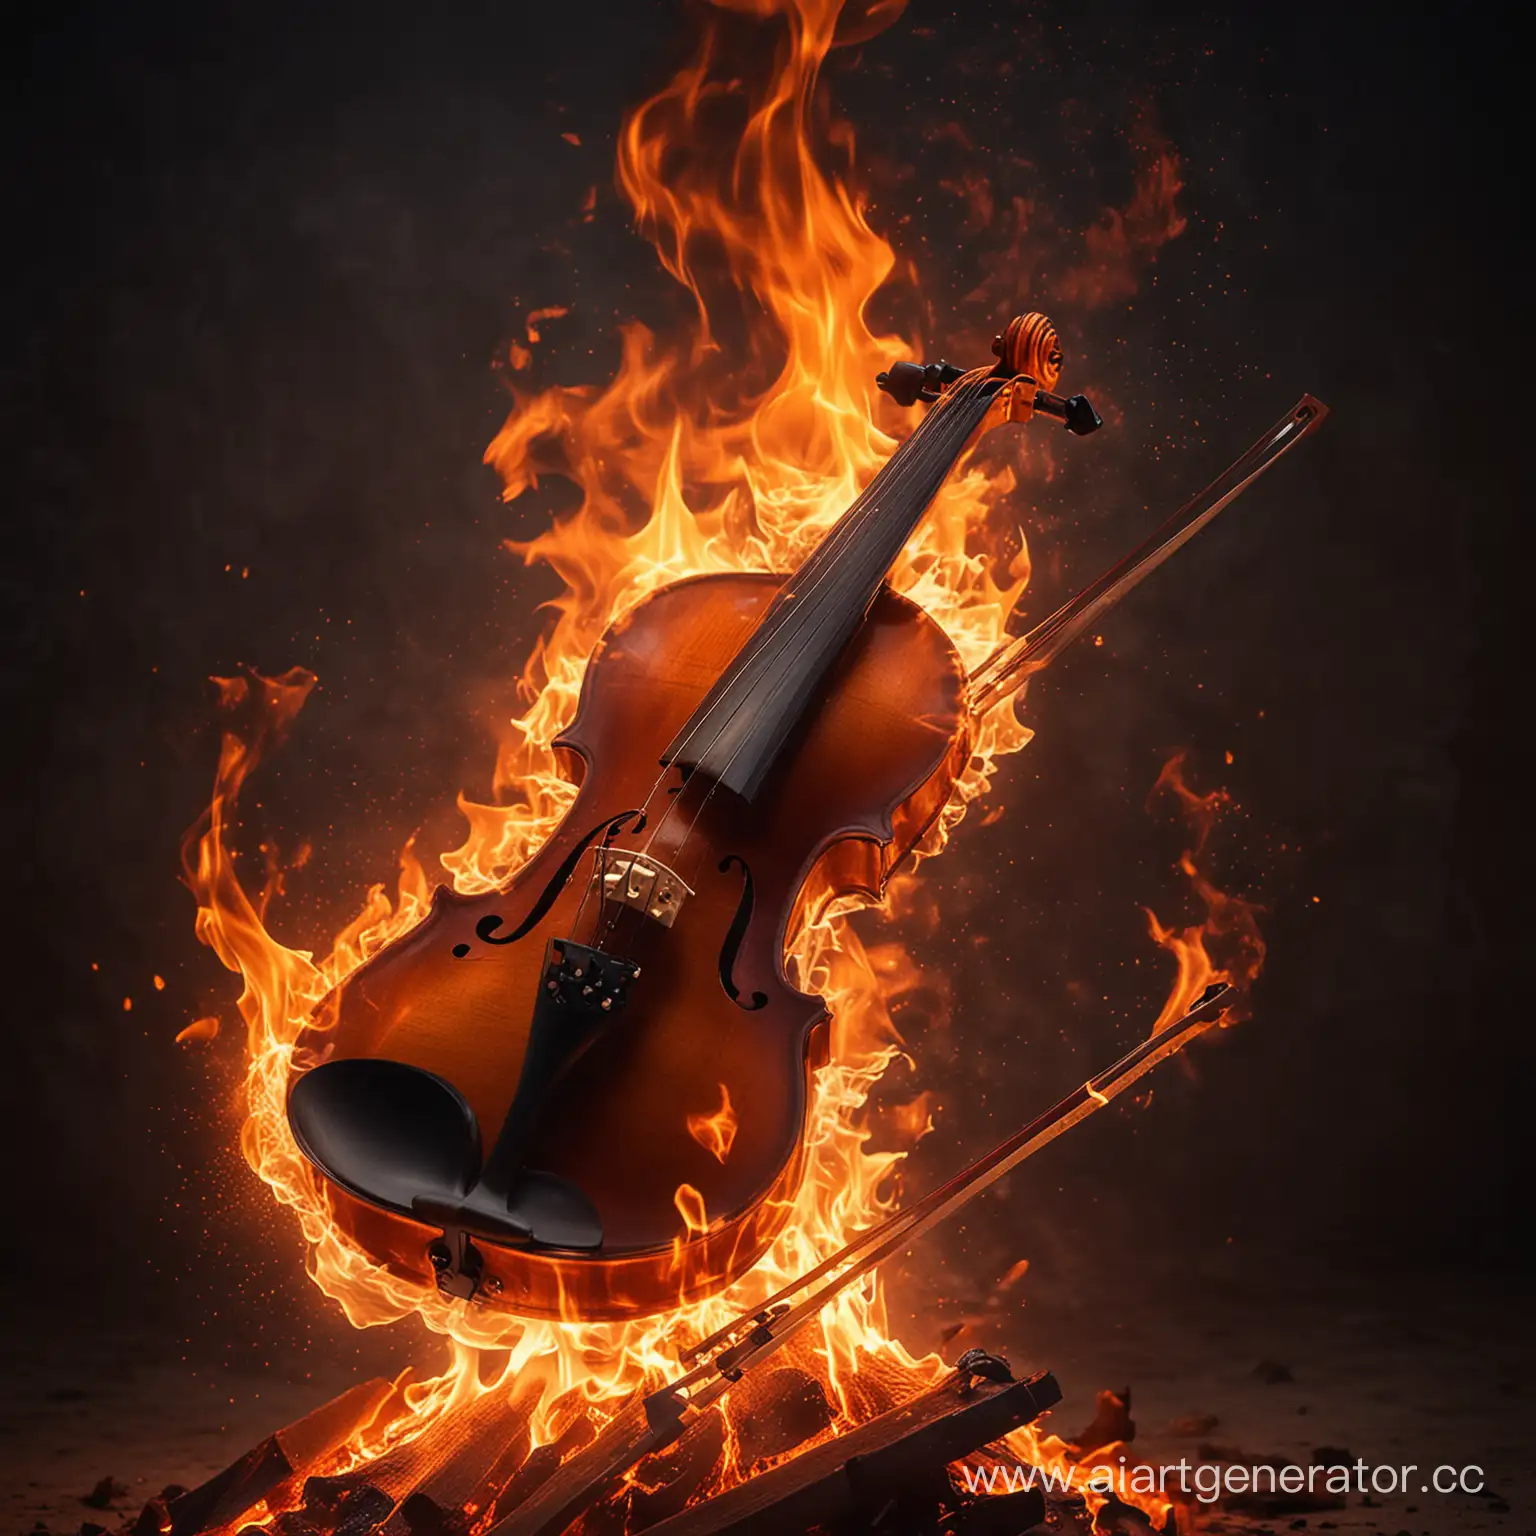 Fiery-Violin-Instrument-Engulfed-in-Flames